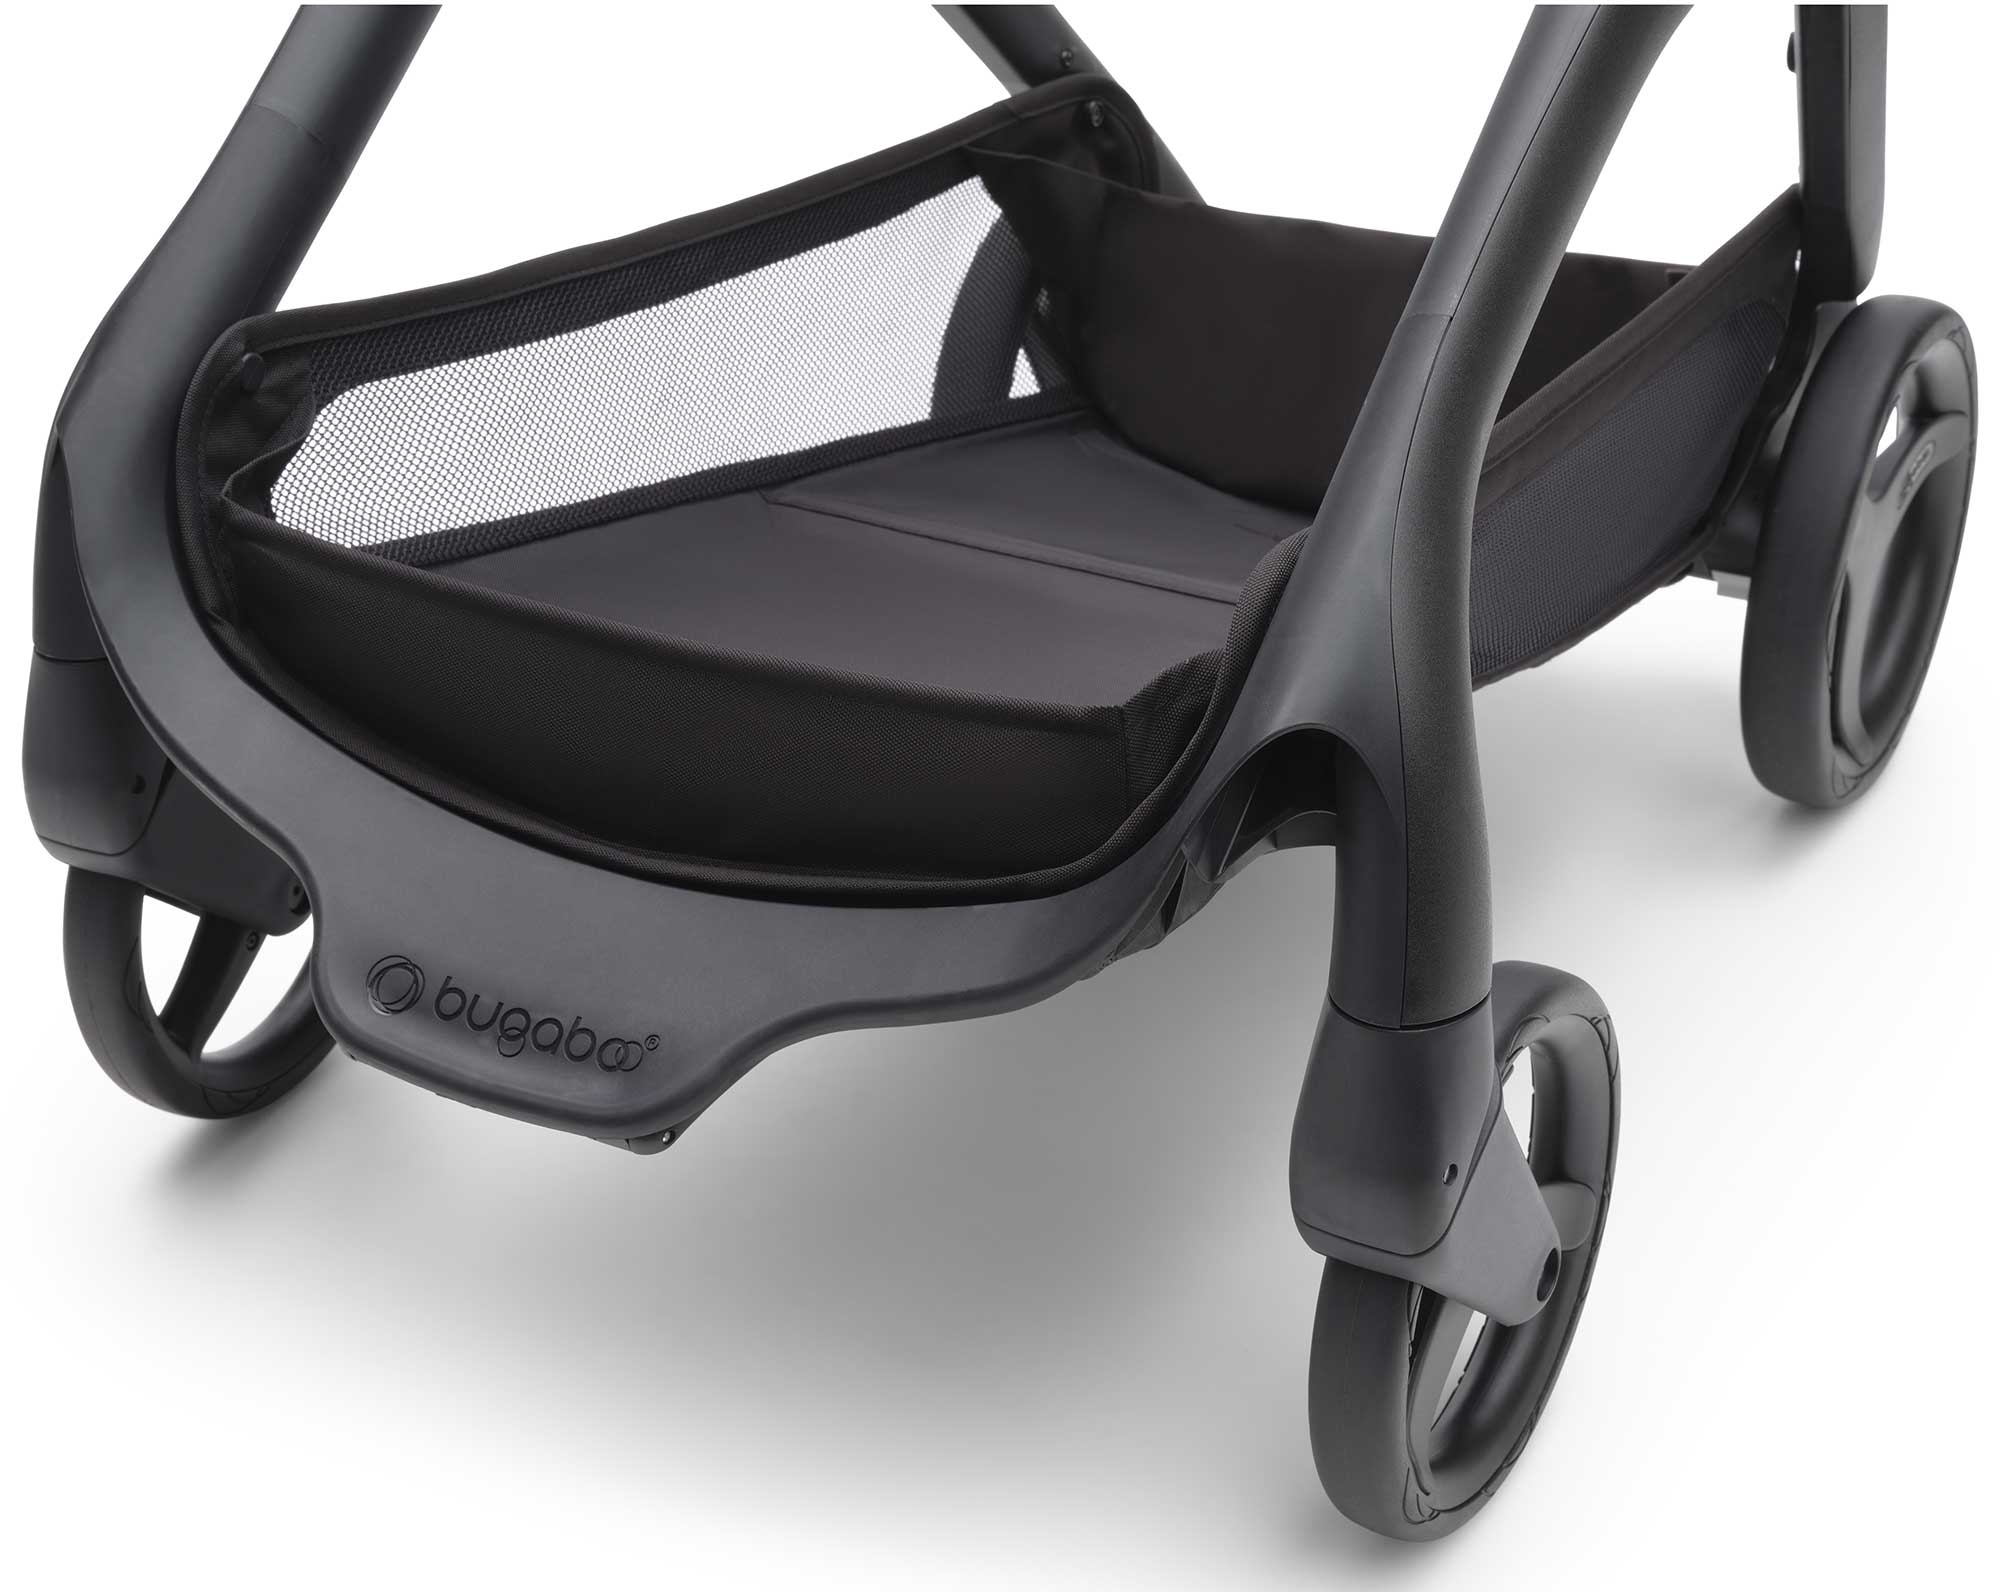 Bugaboo Dragonfly Complete Pushchair - Black/Midnight Black Pushchairs & Buggies 100176040 8717447448044